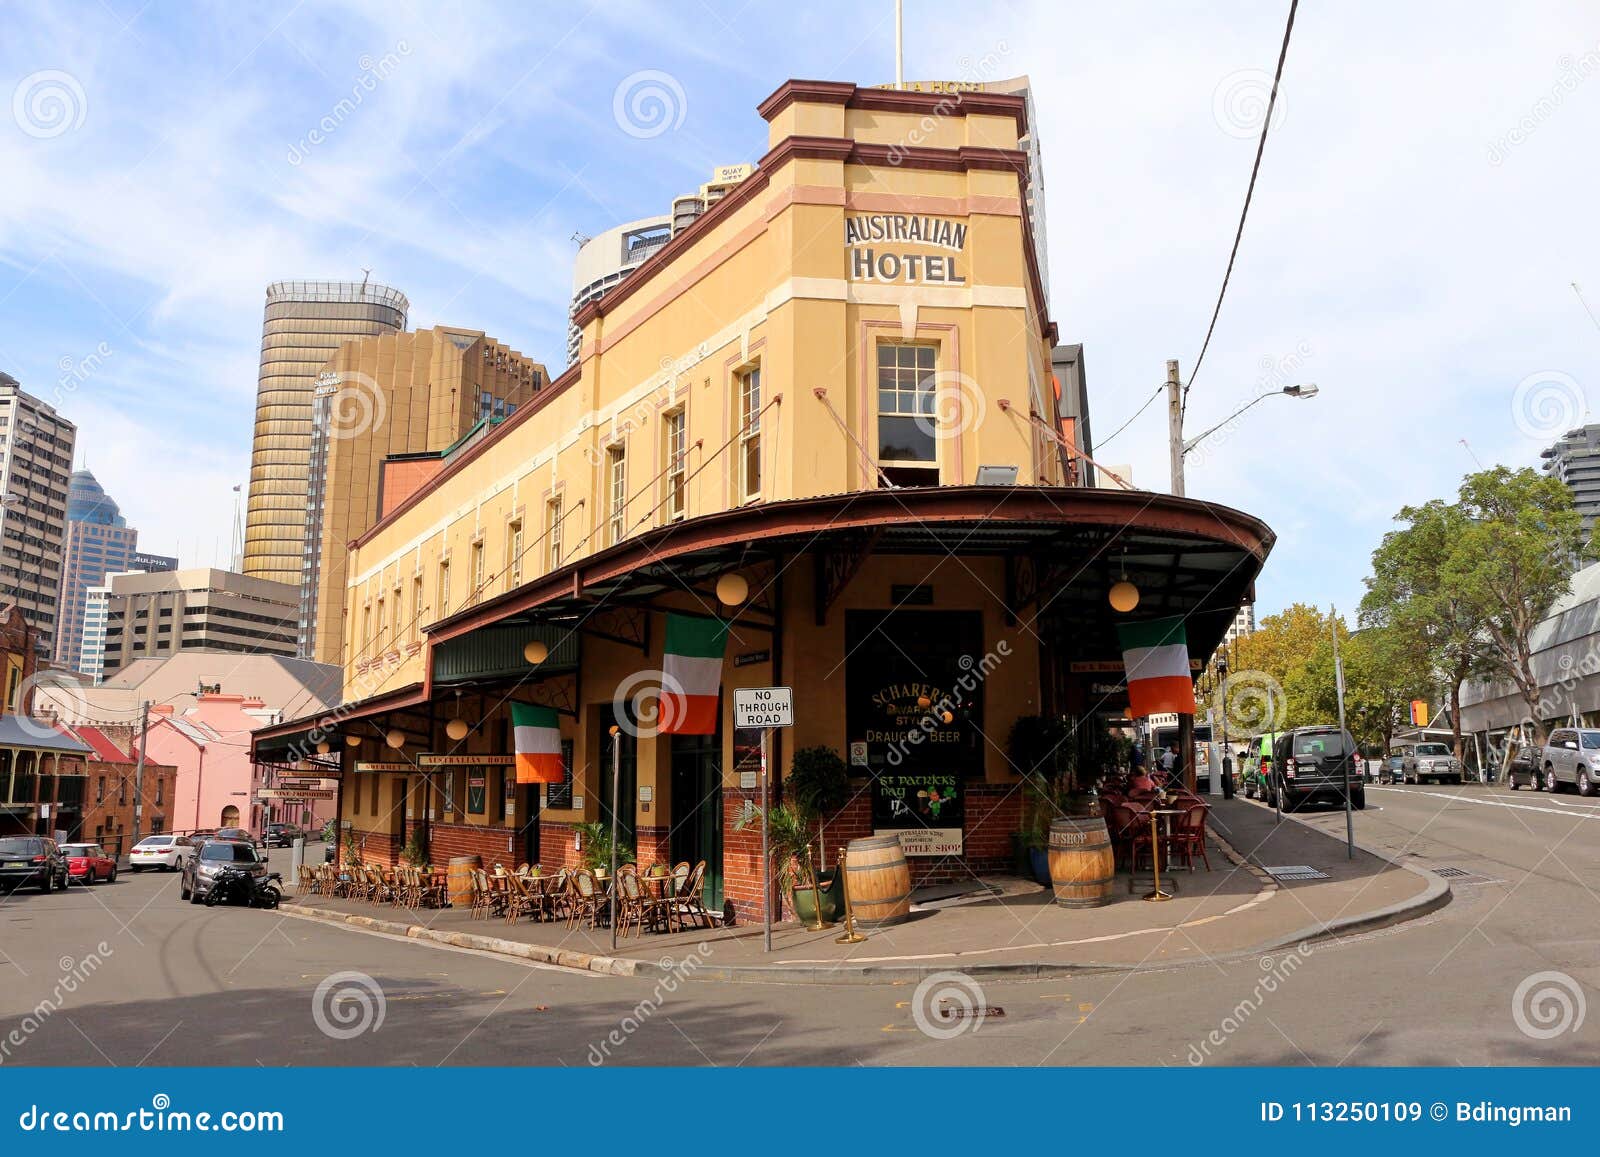 The Australian Heritage Hotel Editorial Image - Image architecture, craft: